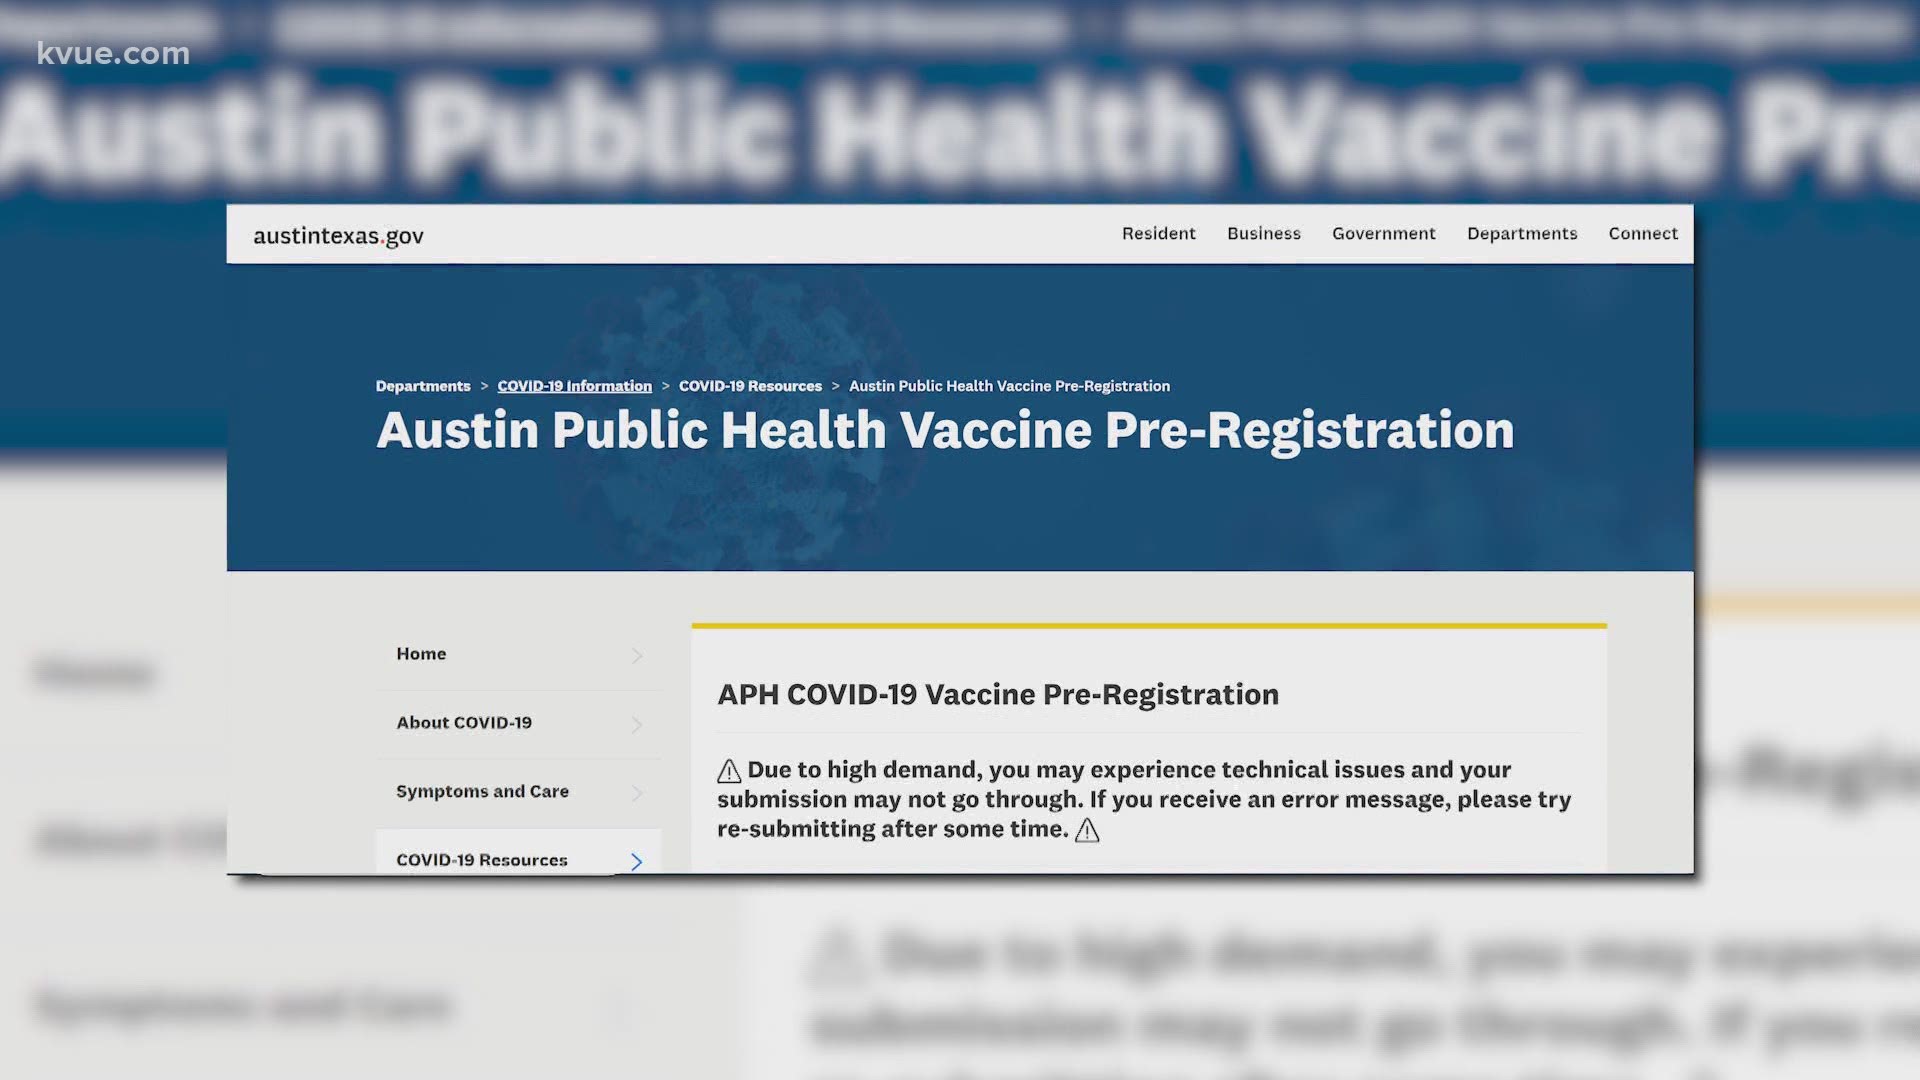 Austin Public Health has changed its policy and will release COVID-19 vaccine appointment times on Tuesdays and Thursdays only.